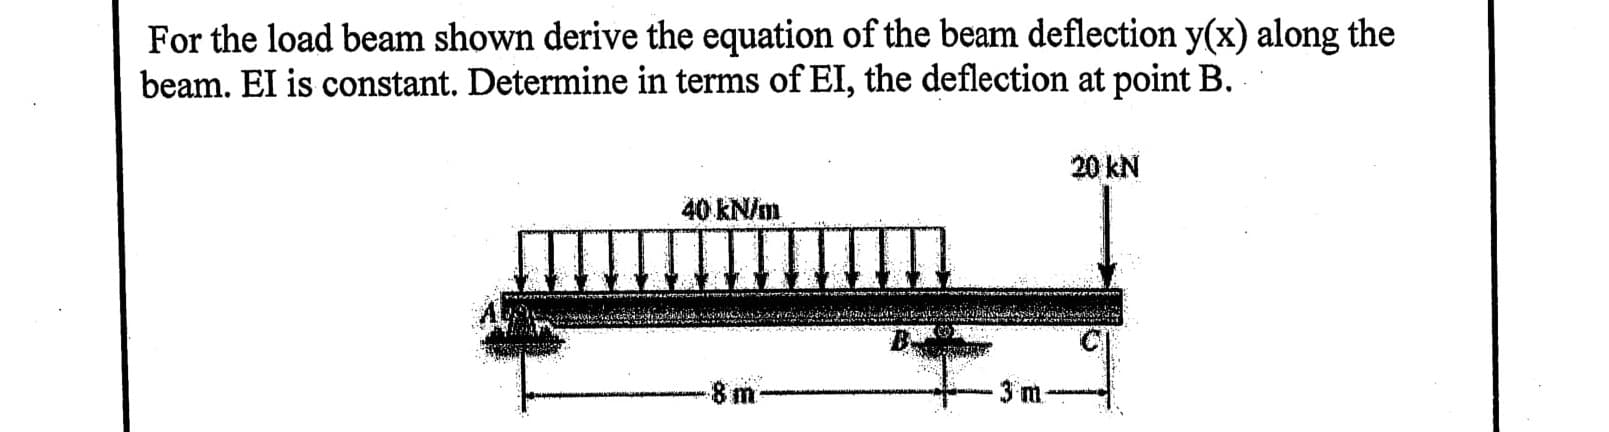 beam. El is constant. Determine in terms of EI, the deflection at point B.
20 kN
40 kN/m
B
8 m
3 m
